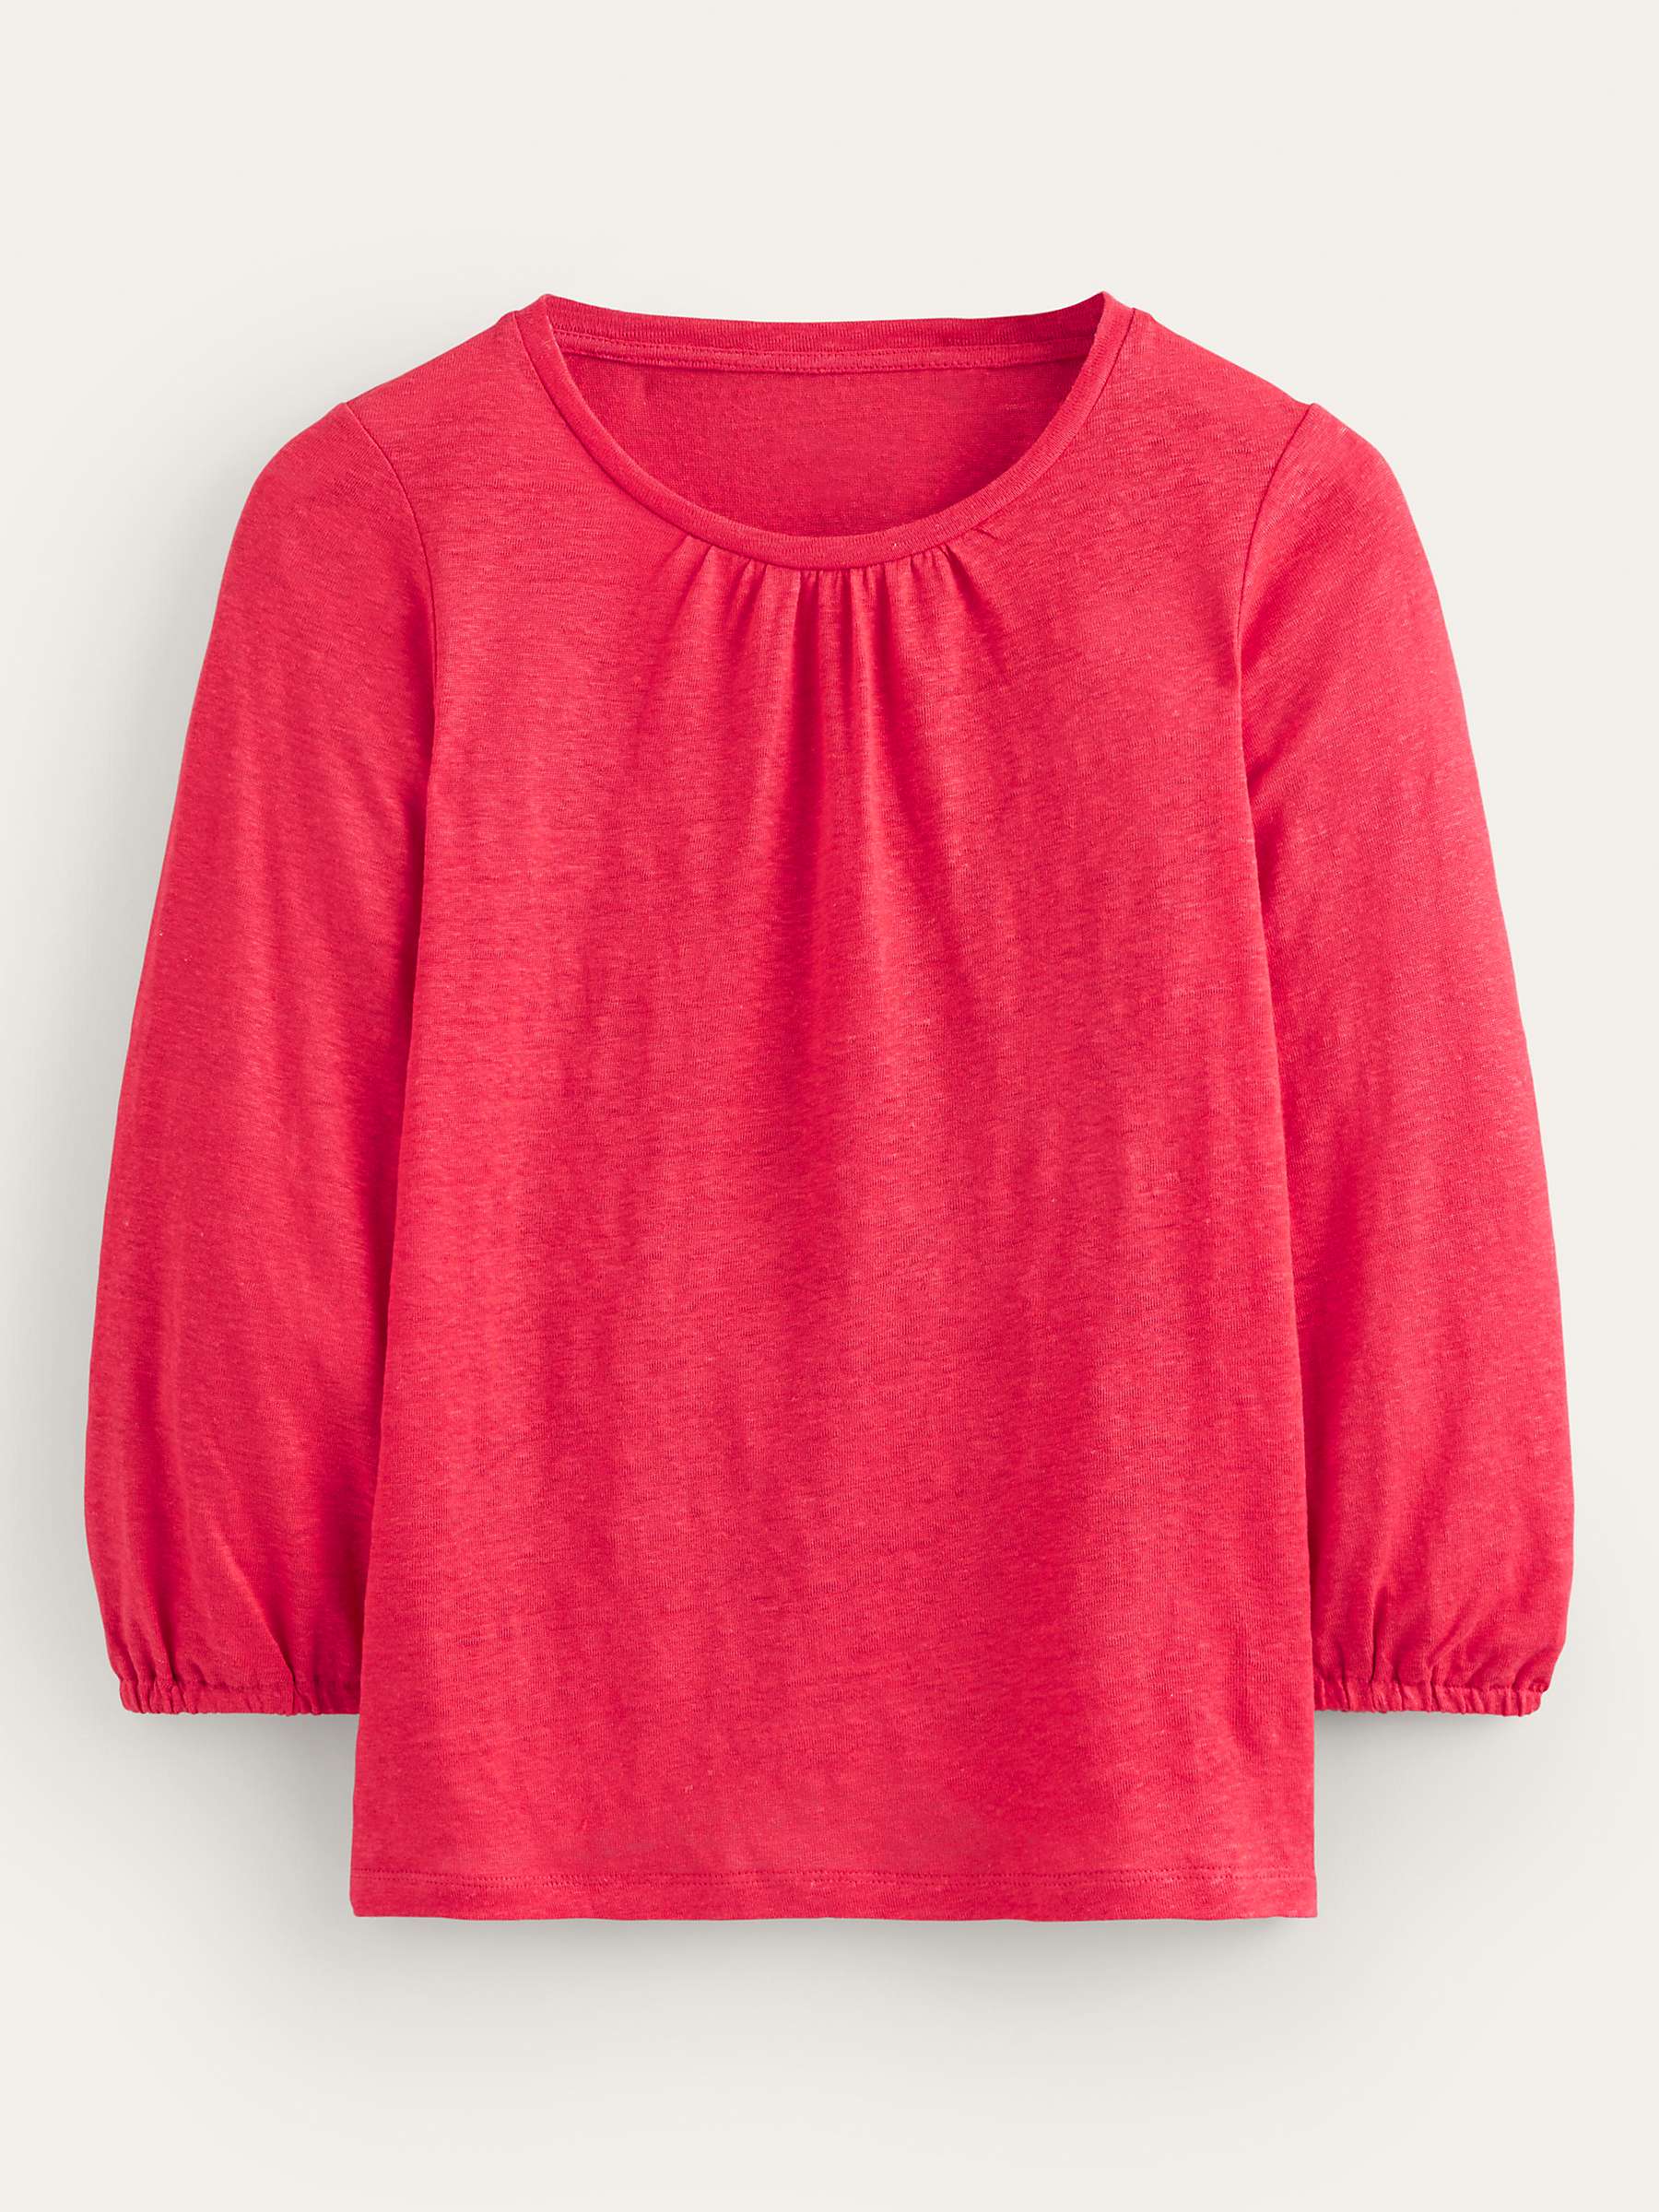 Buy Boden Linen Gathered Neck Blouse, Hibiscus Online at johnlewis.com